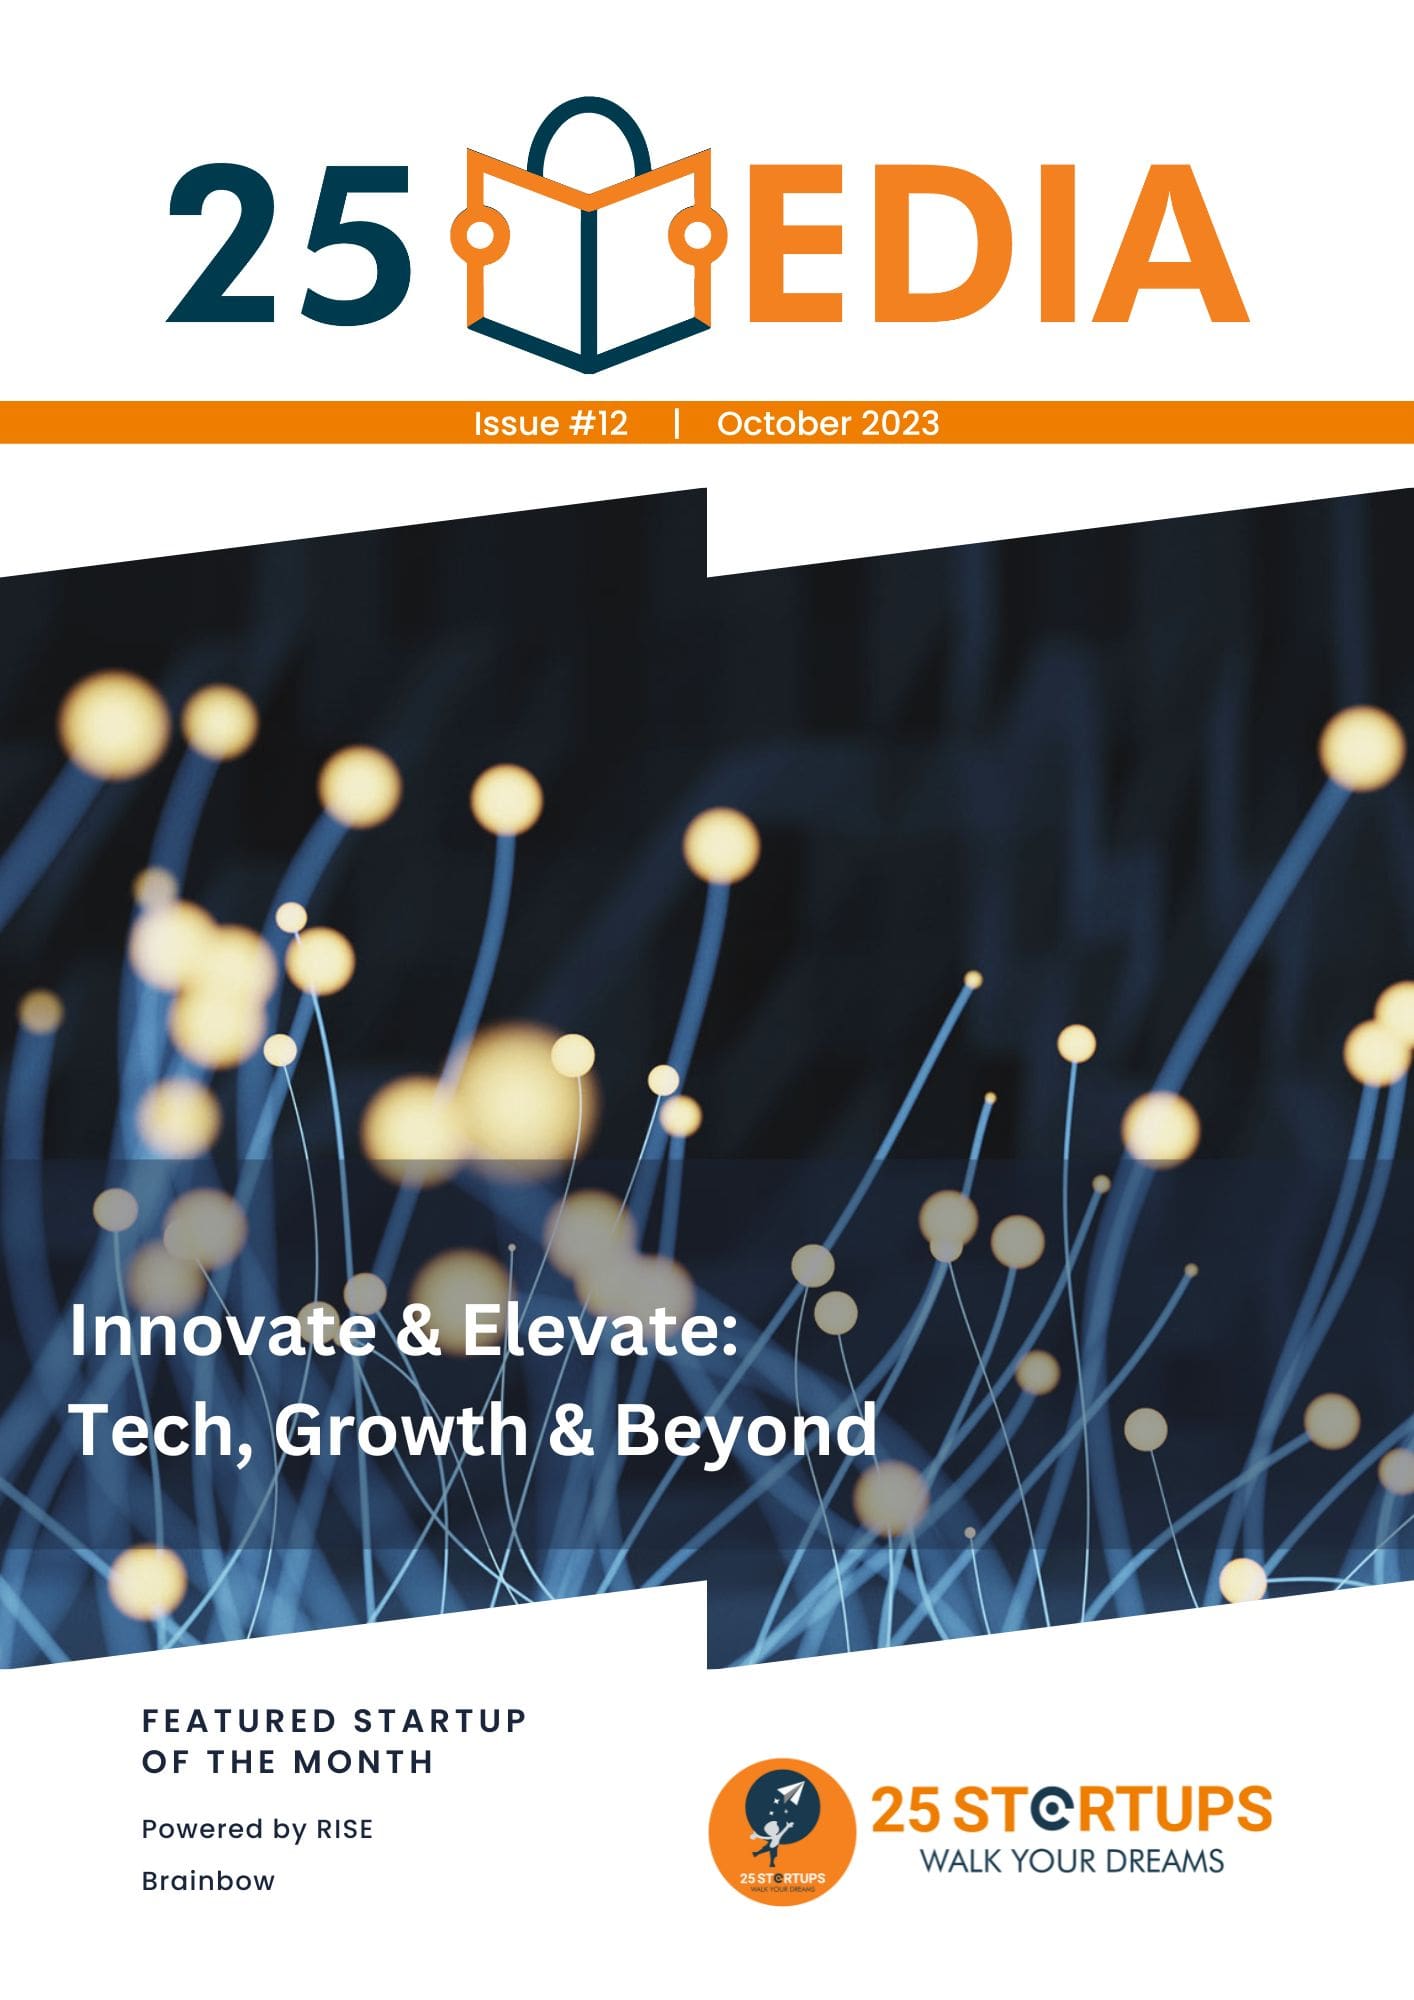 25 Media Issue #12: Innovate & Elevate: Tech, Growth & Beyond